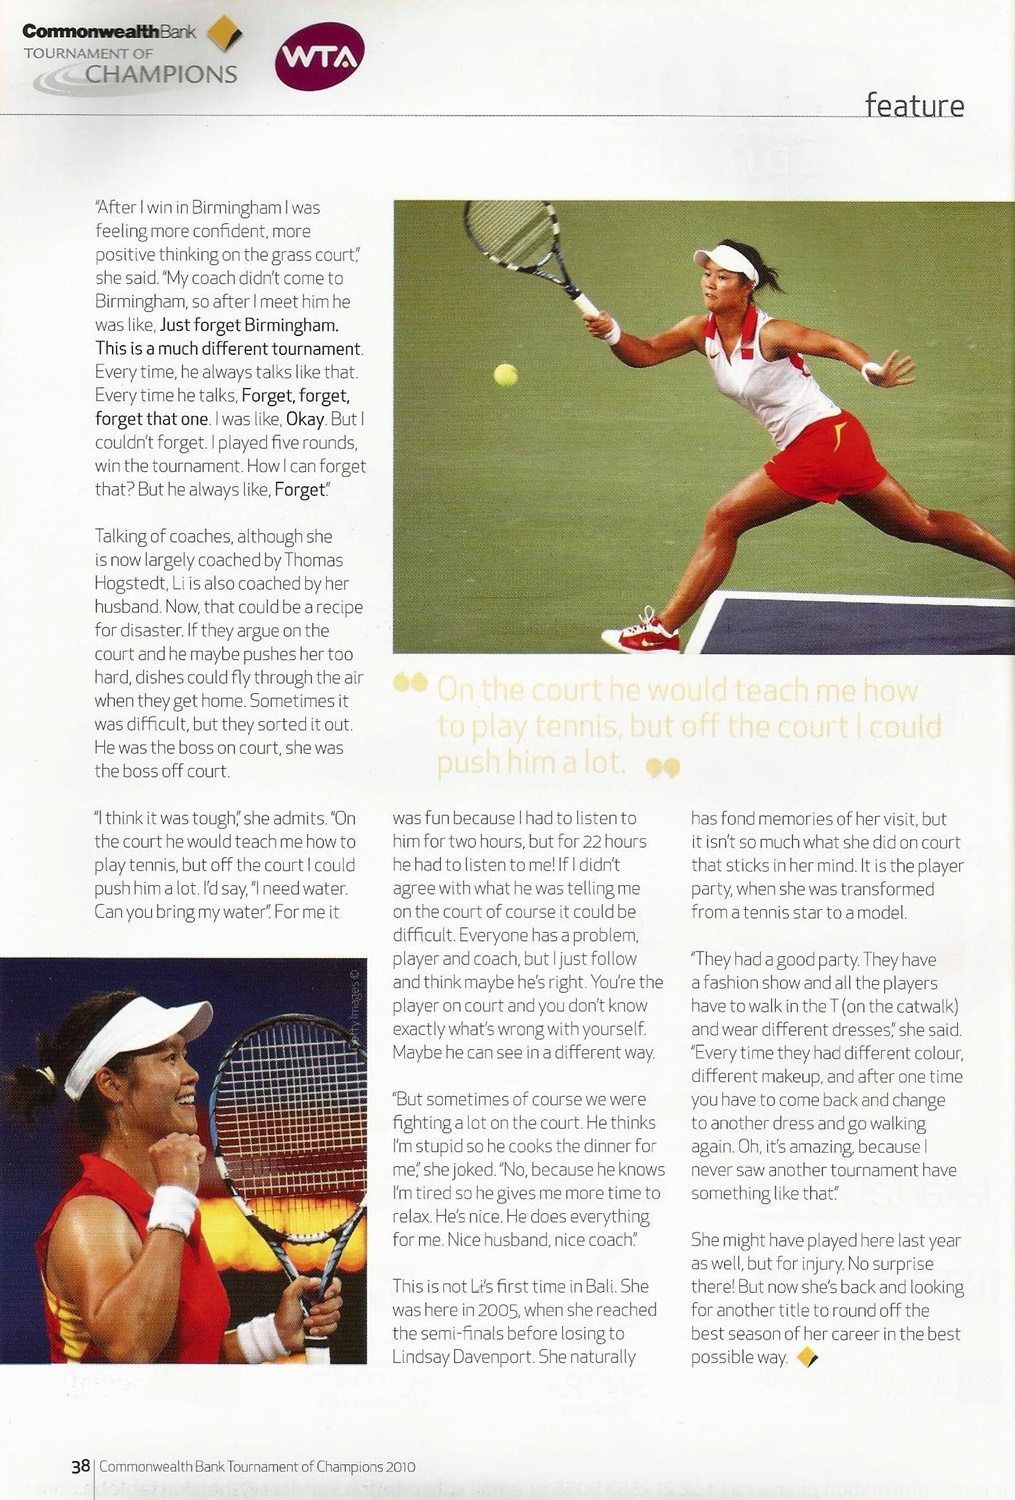 Cooking and Cleaning has to wait - Li Na has business to attend to #3 by Barry Wood